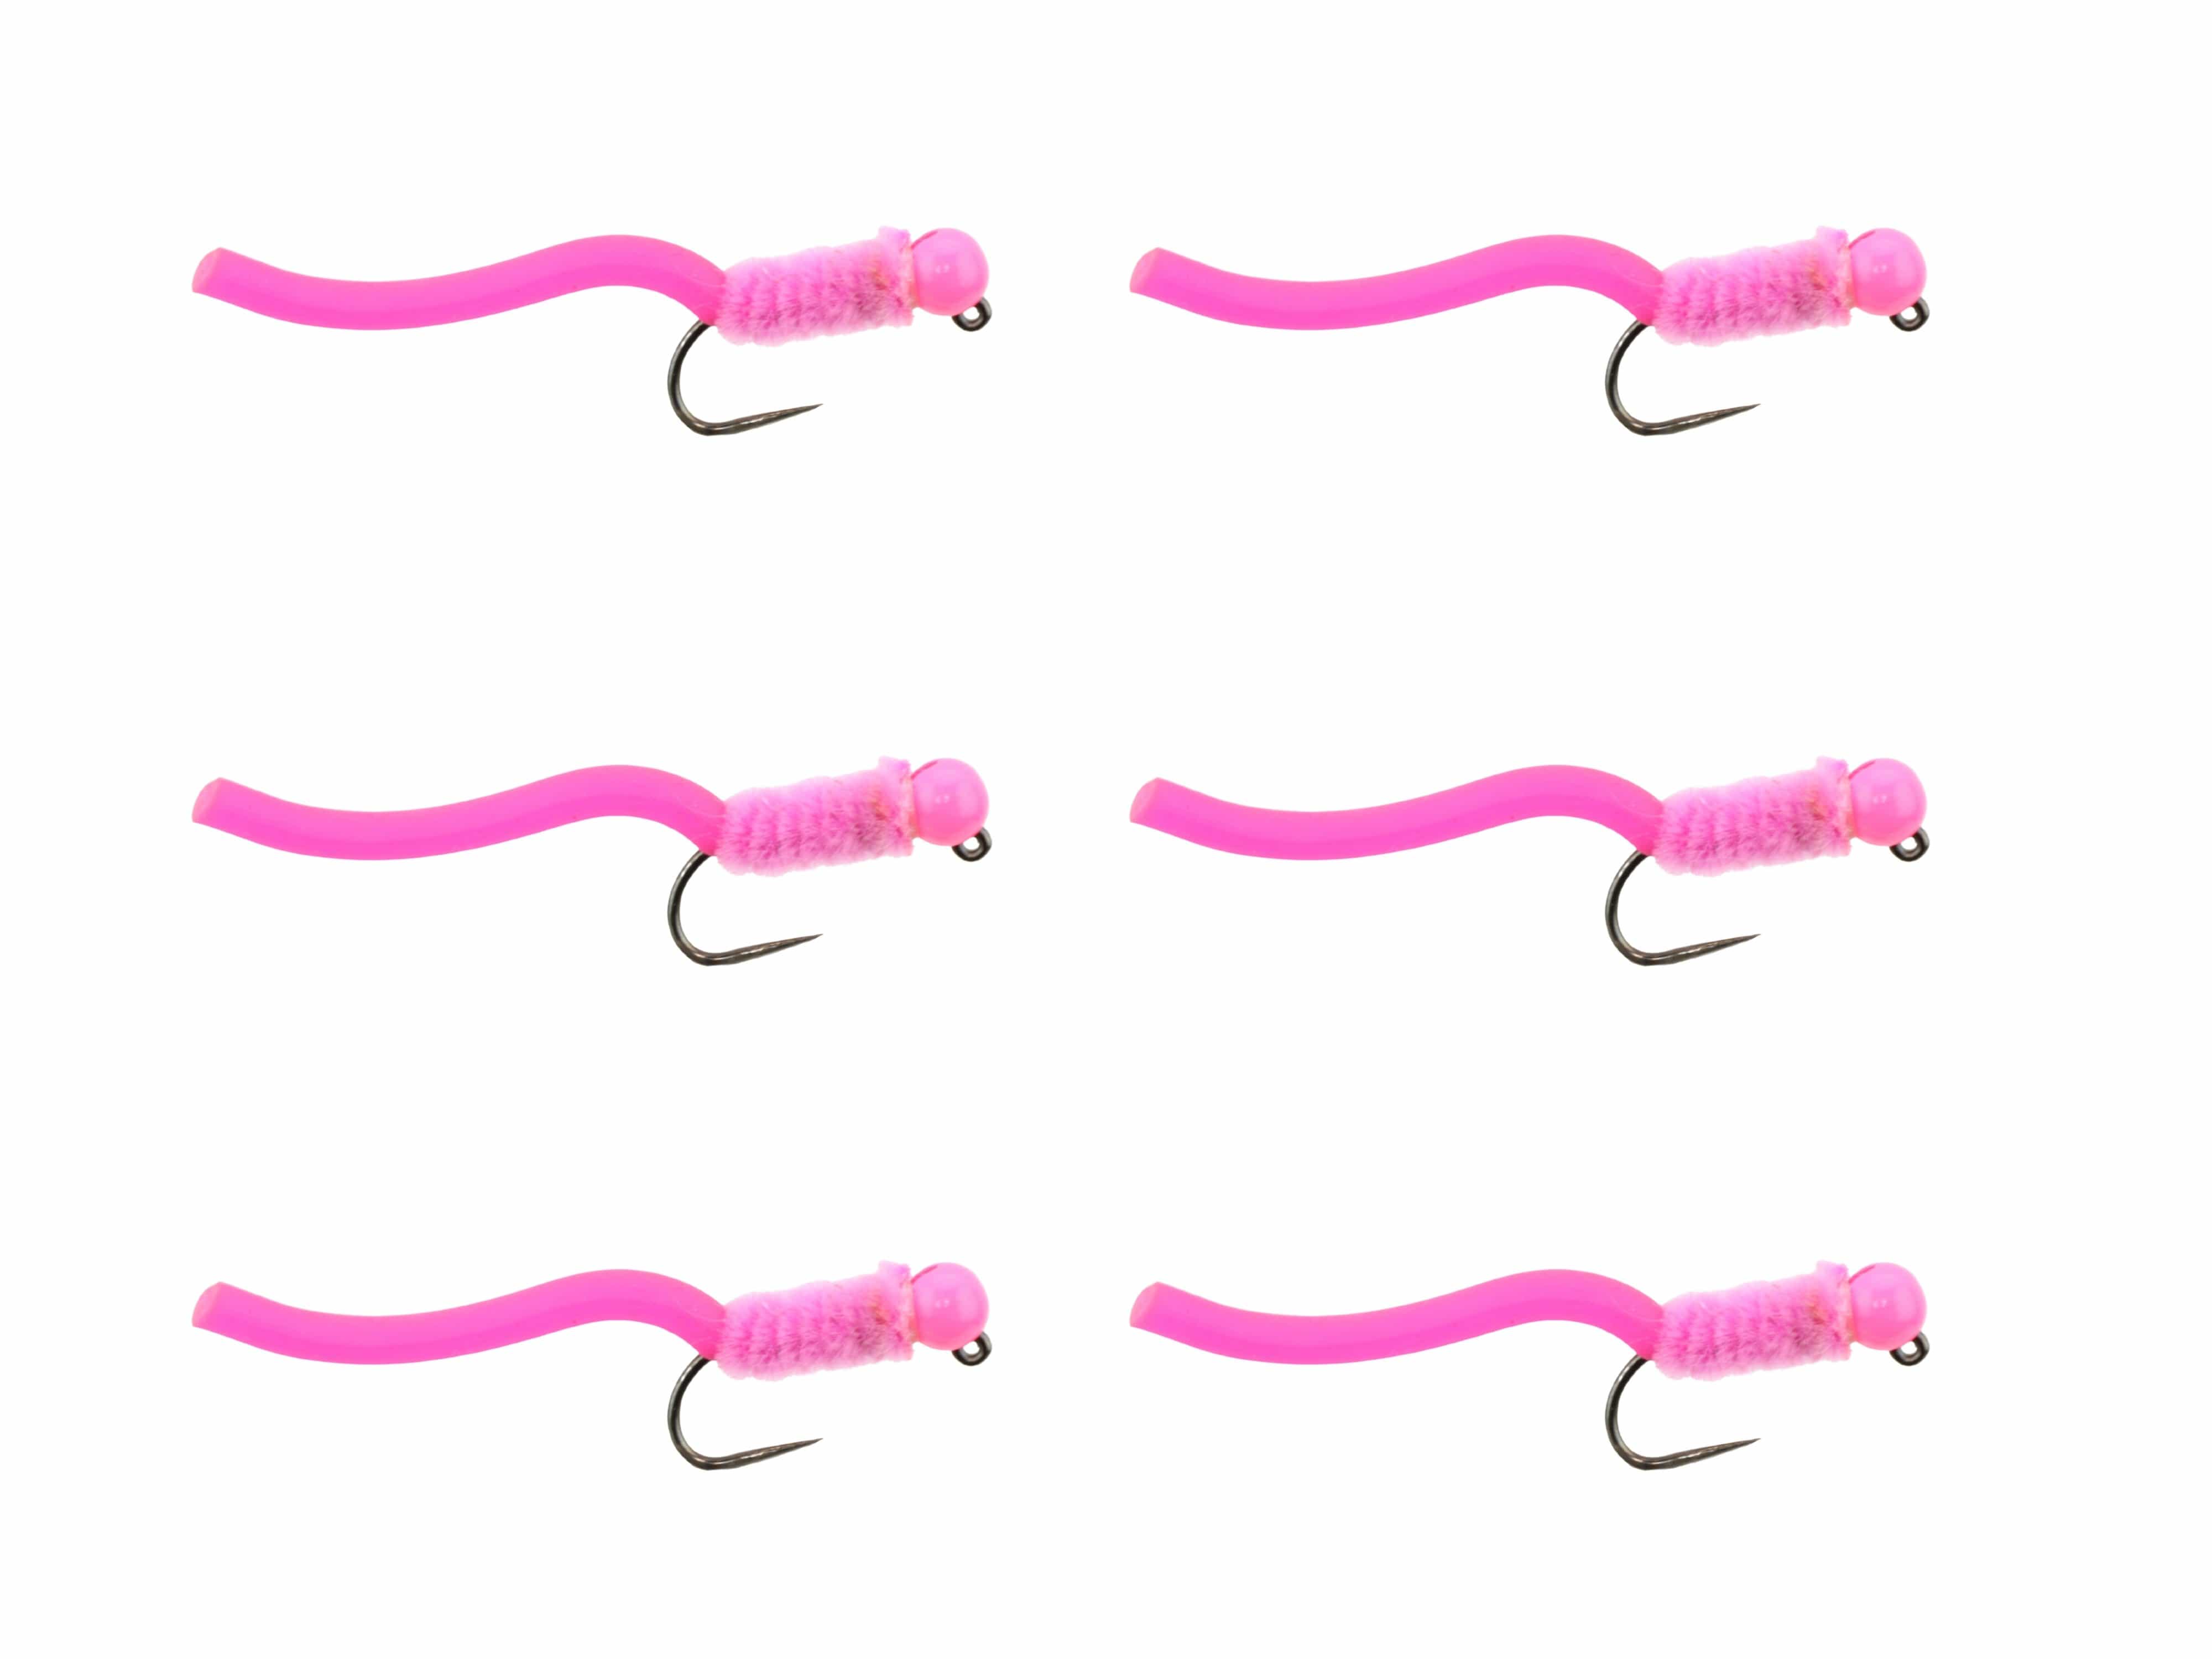 Wild Water Fly Fishing Tungsten Bead Head Pink Squirmy Worm, Size 12, Qty. 6